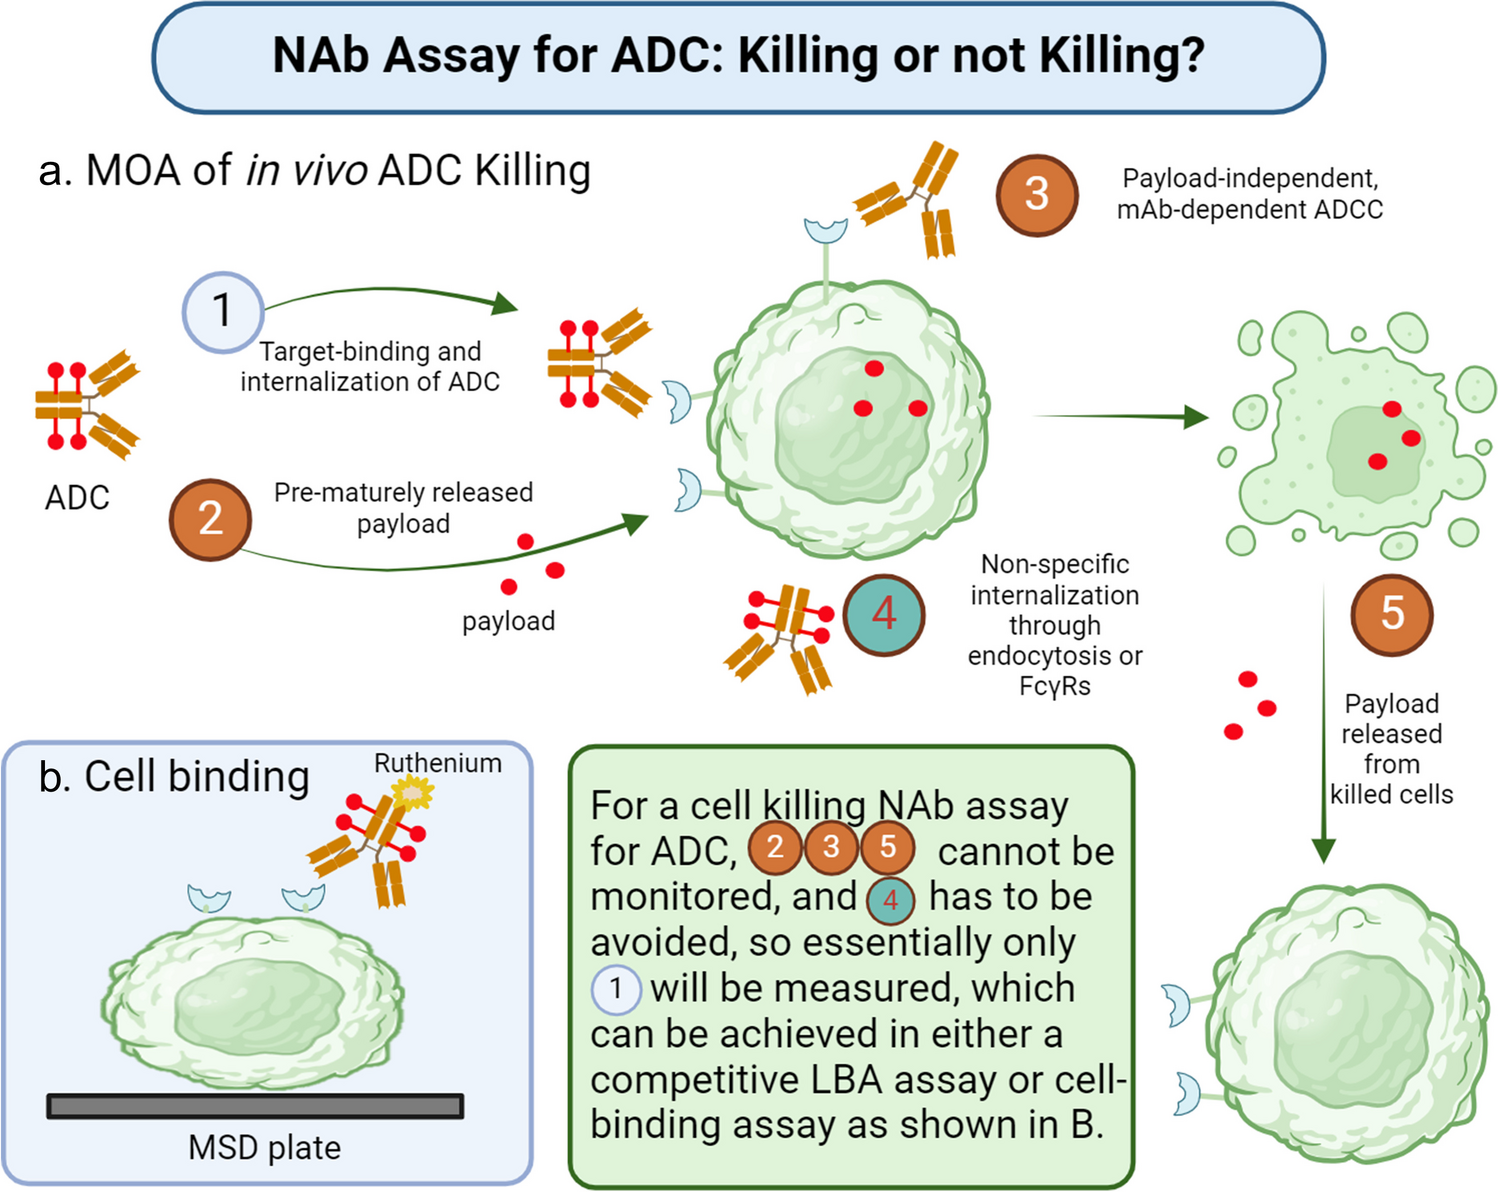 Development and Validation of a Cell-Based Binding Neutralizing Antibody Assay for an Antibody–Drug Conjugate